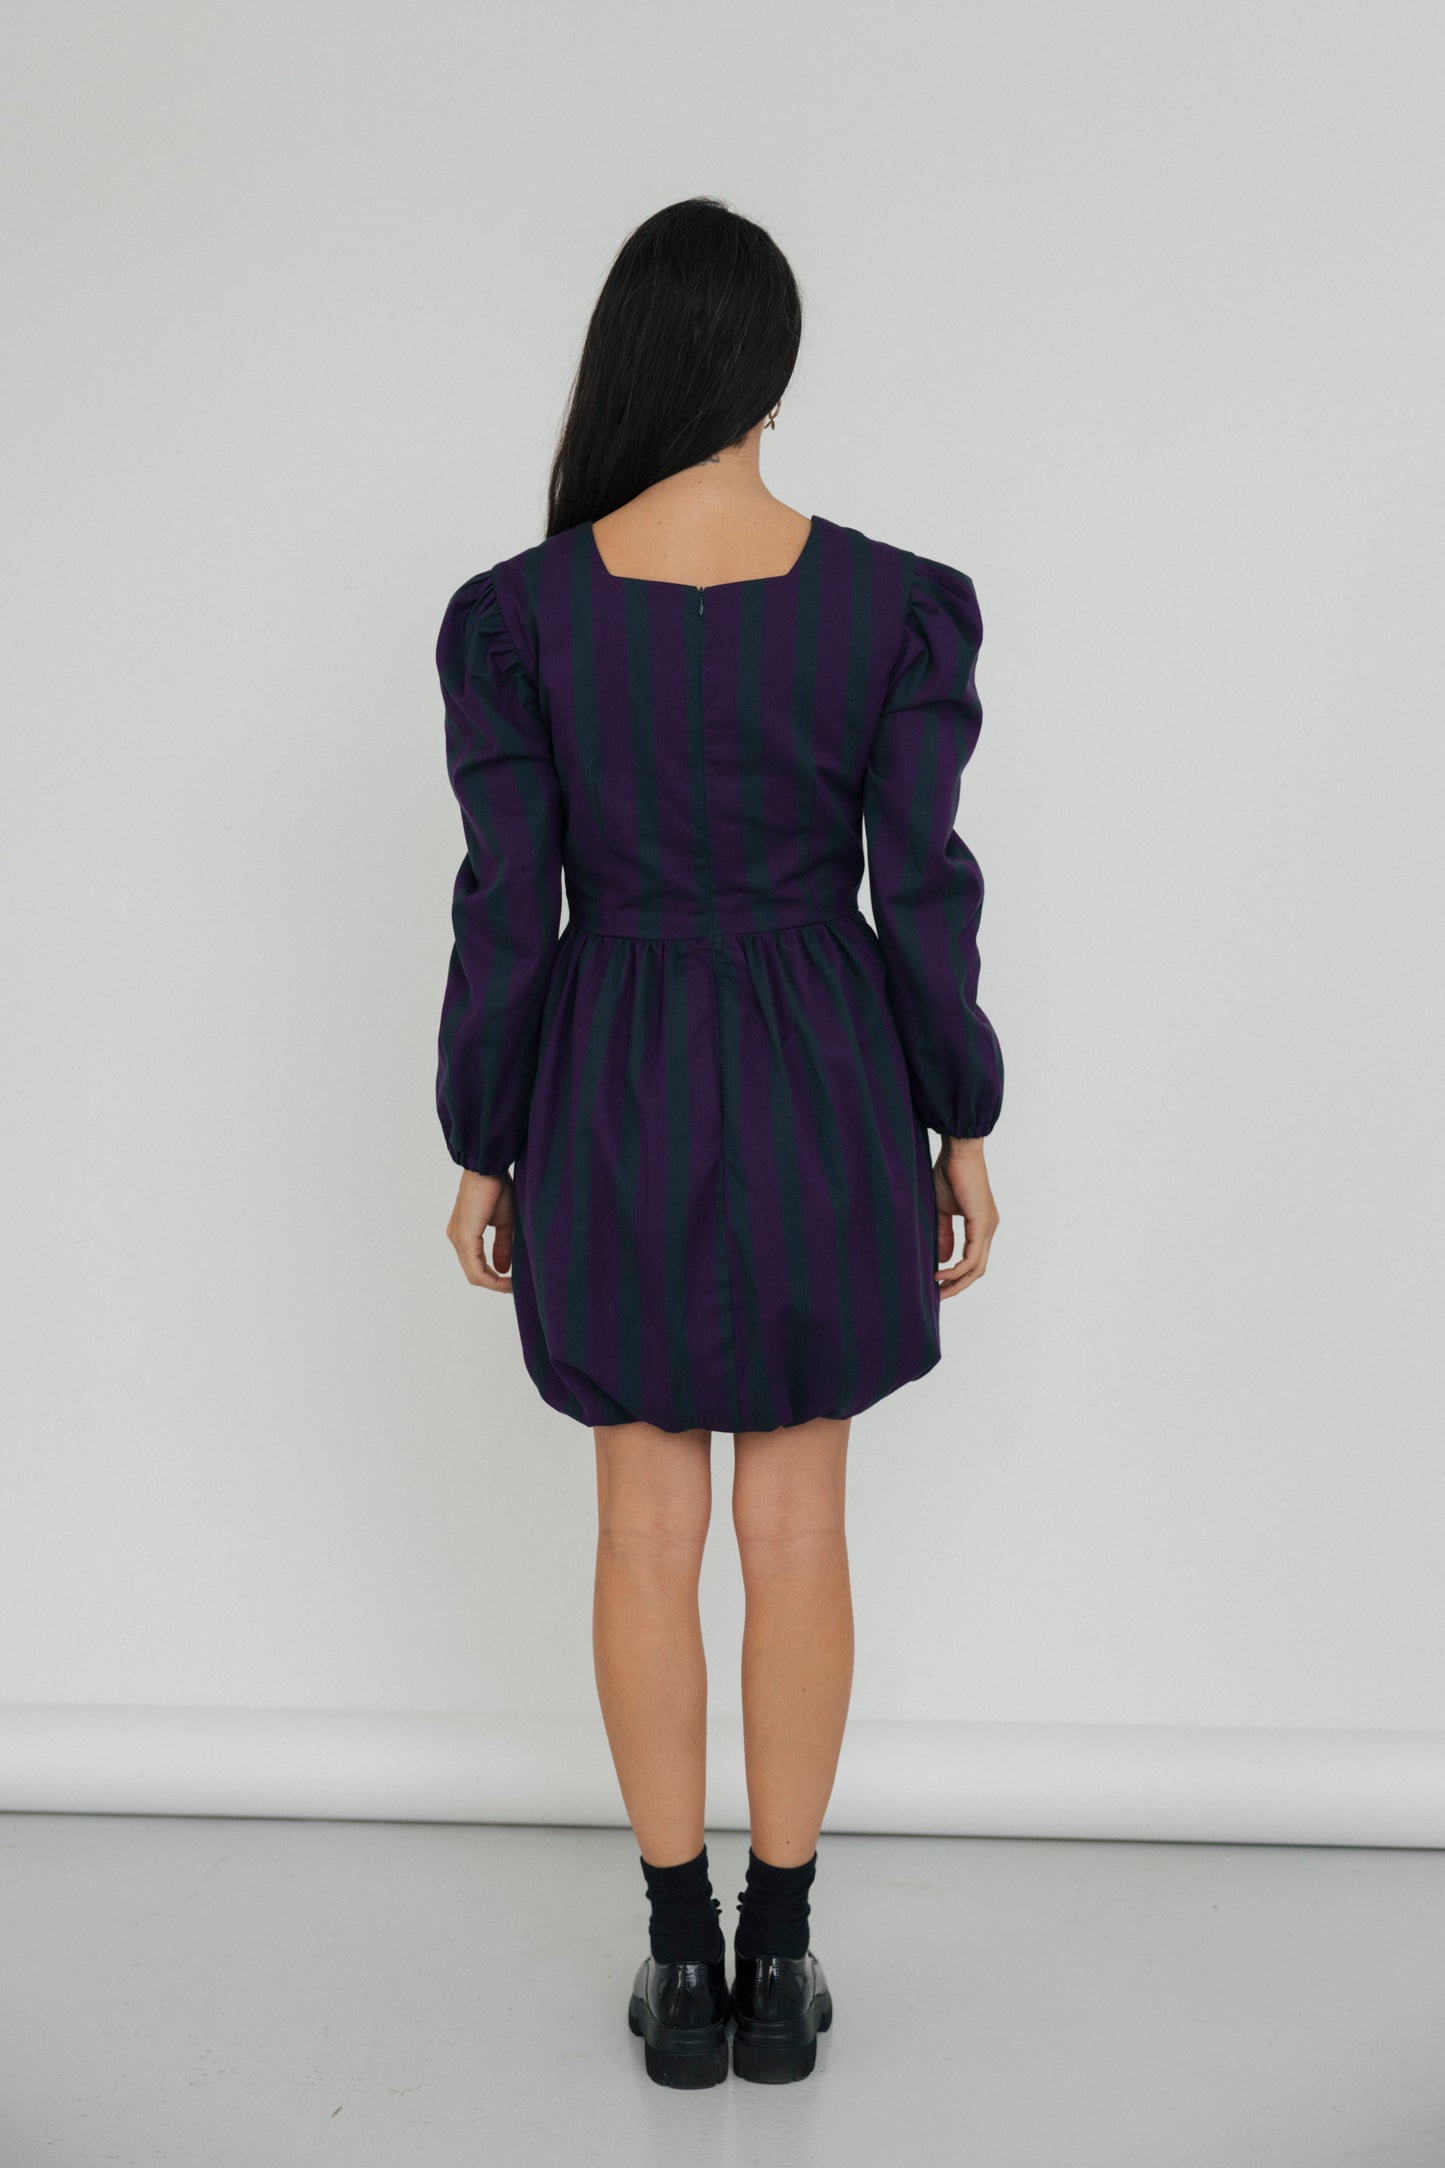 the Blueberry dress